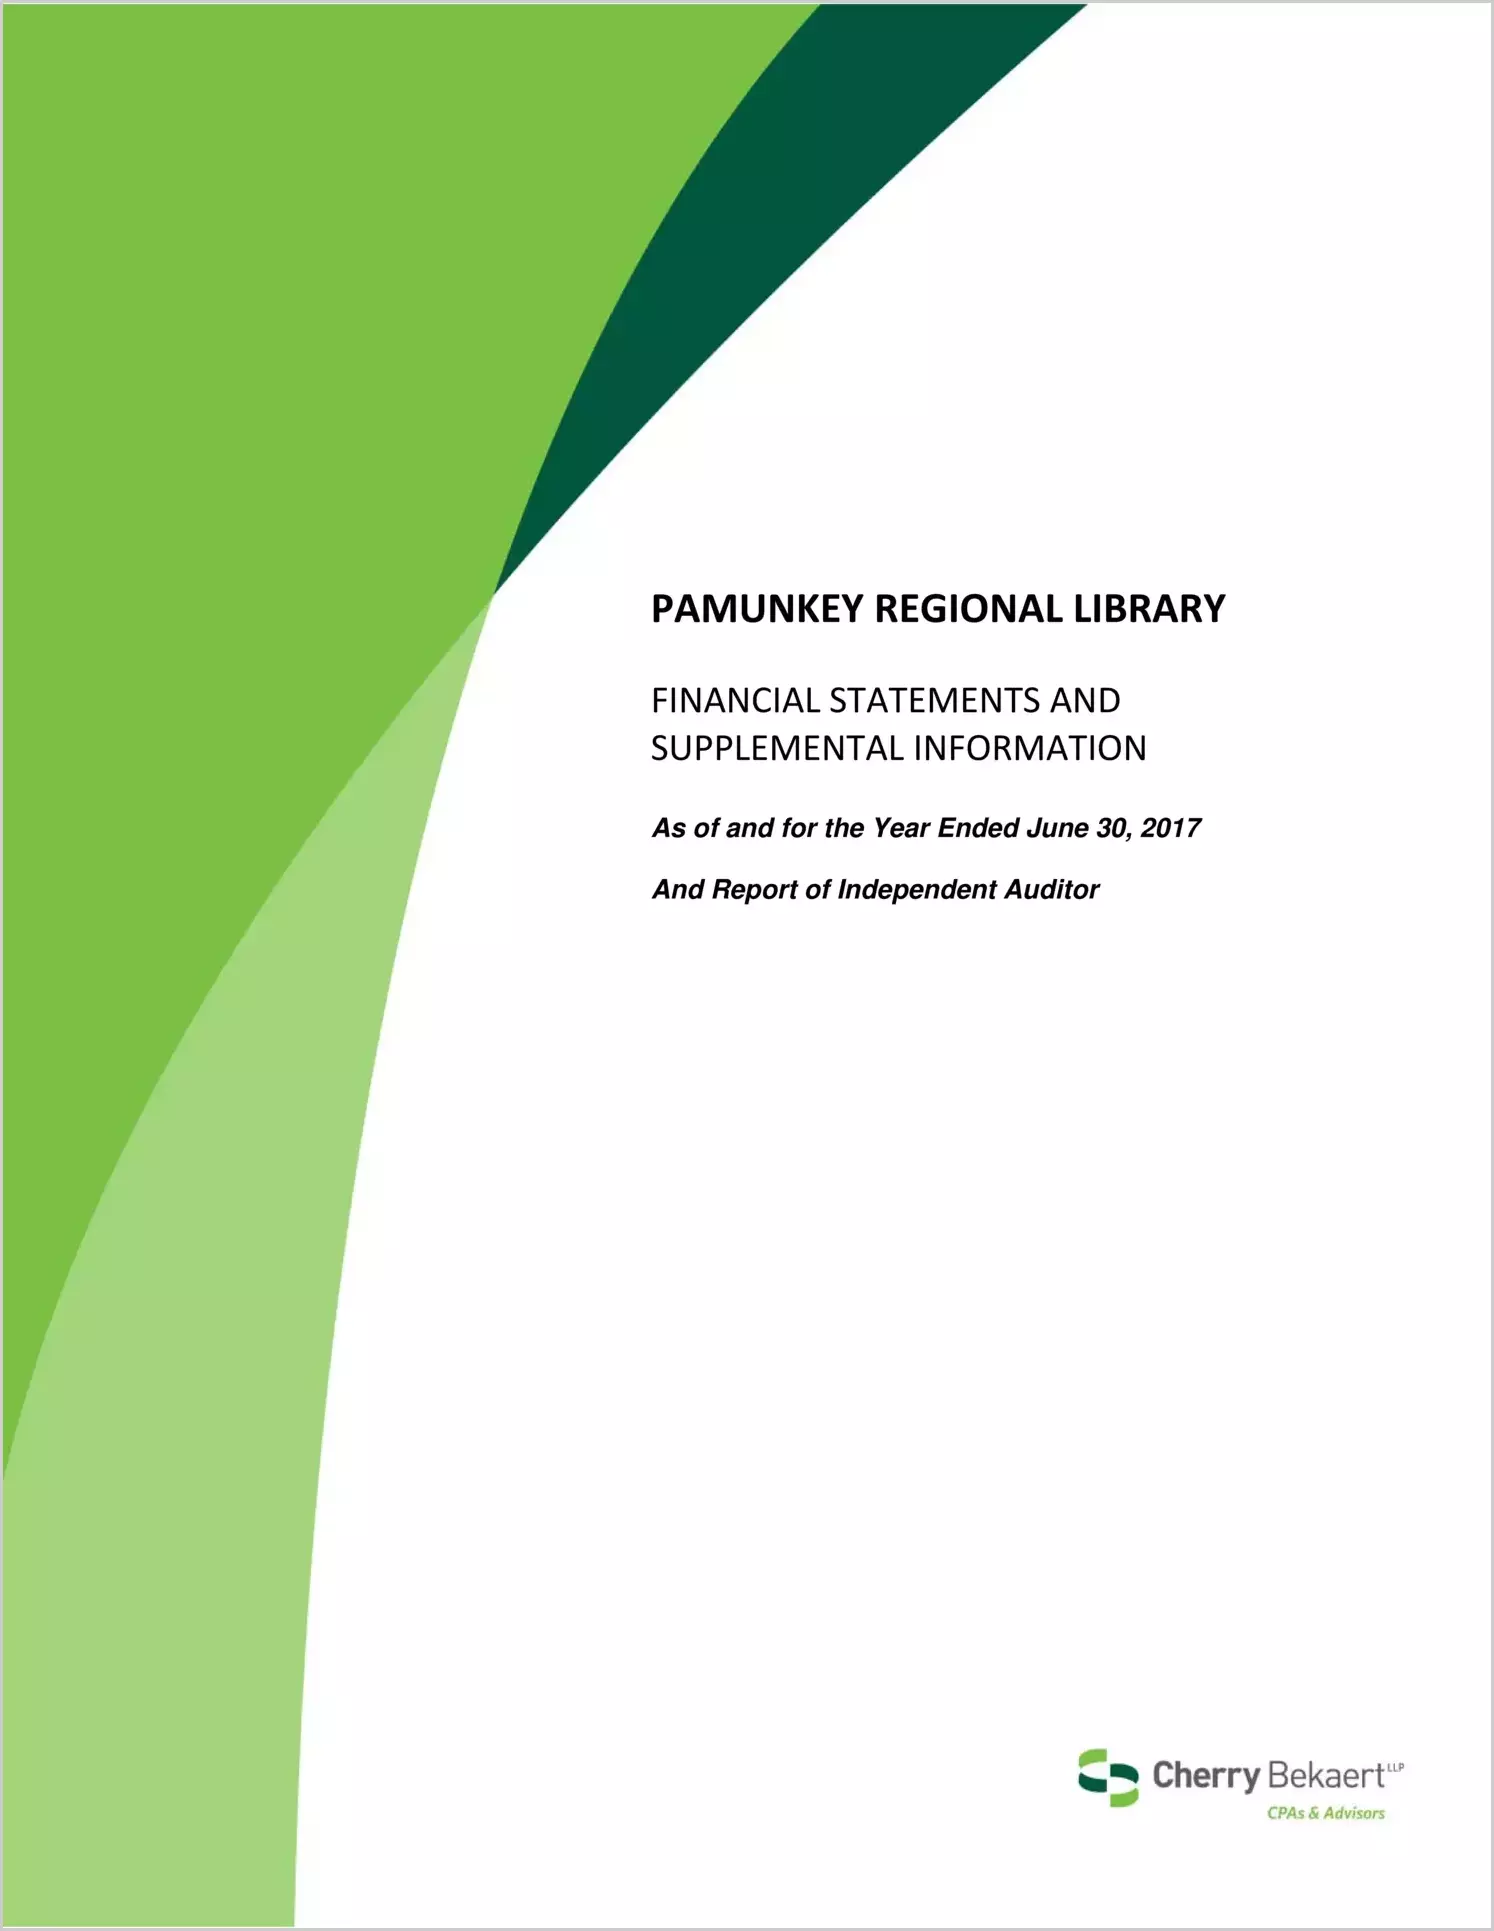 2017 ABC/Other Annual Financial Report  for Pamunkey Regional Library